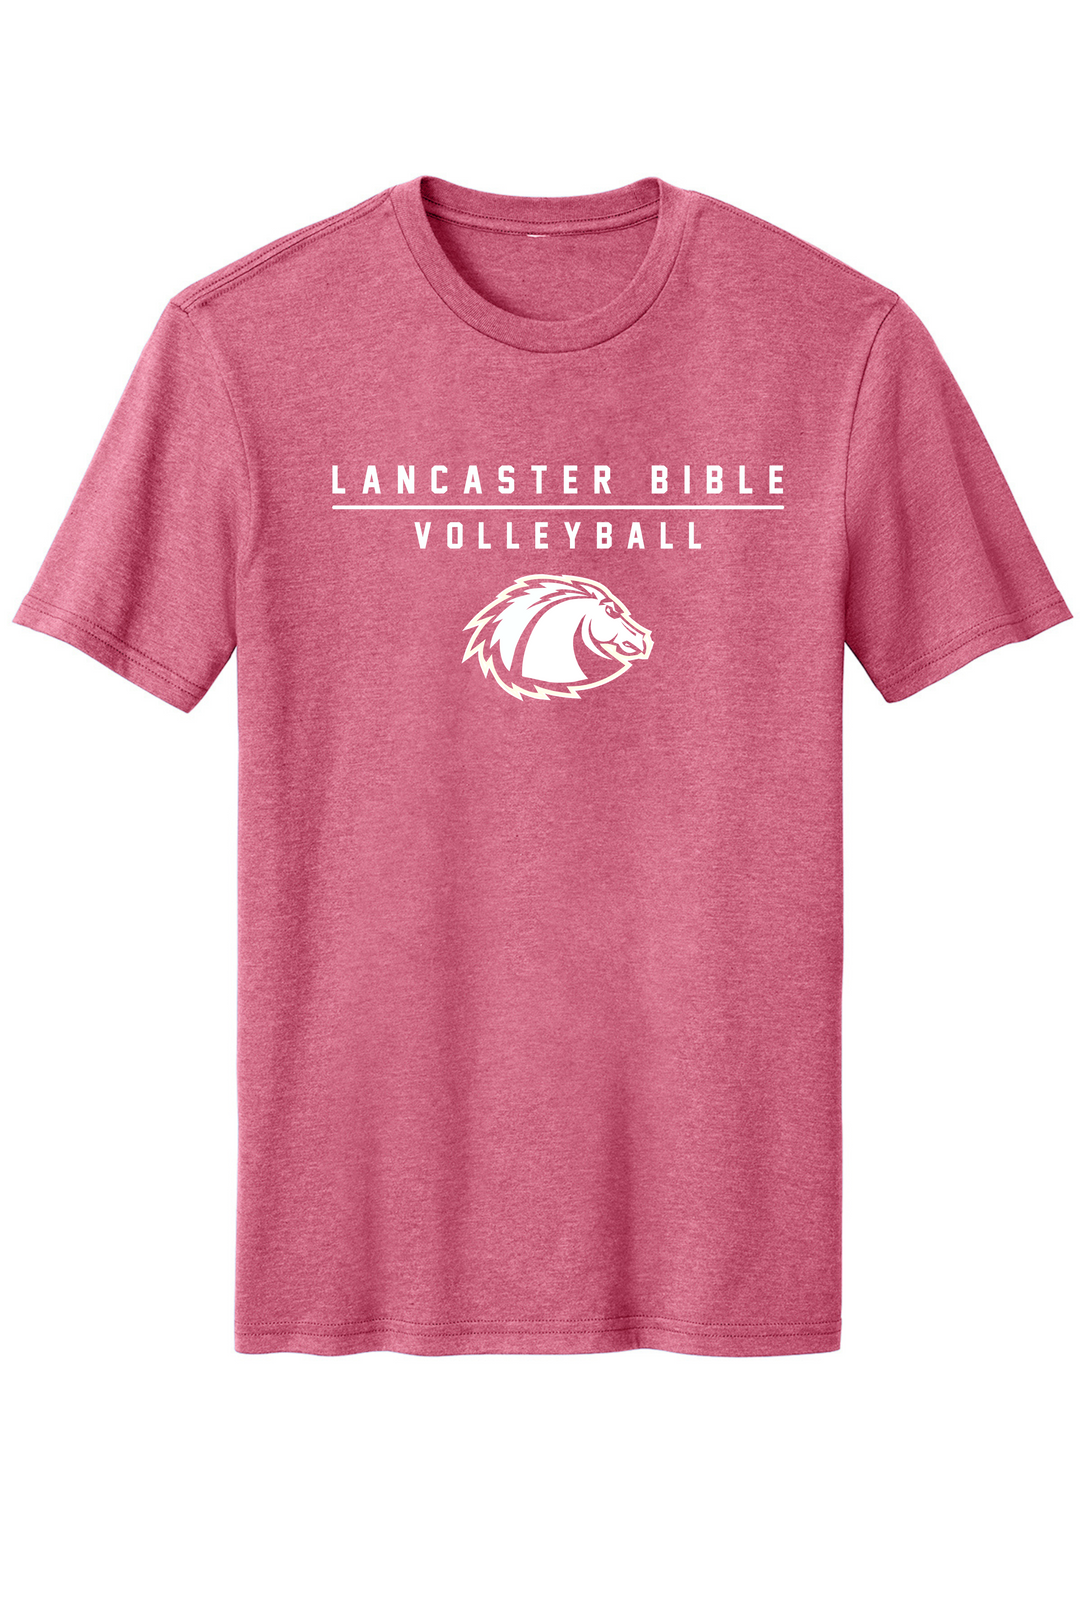 LBC Women's Volleyball "PINK OUT" Tee